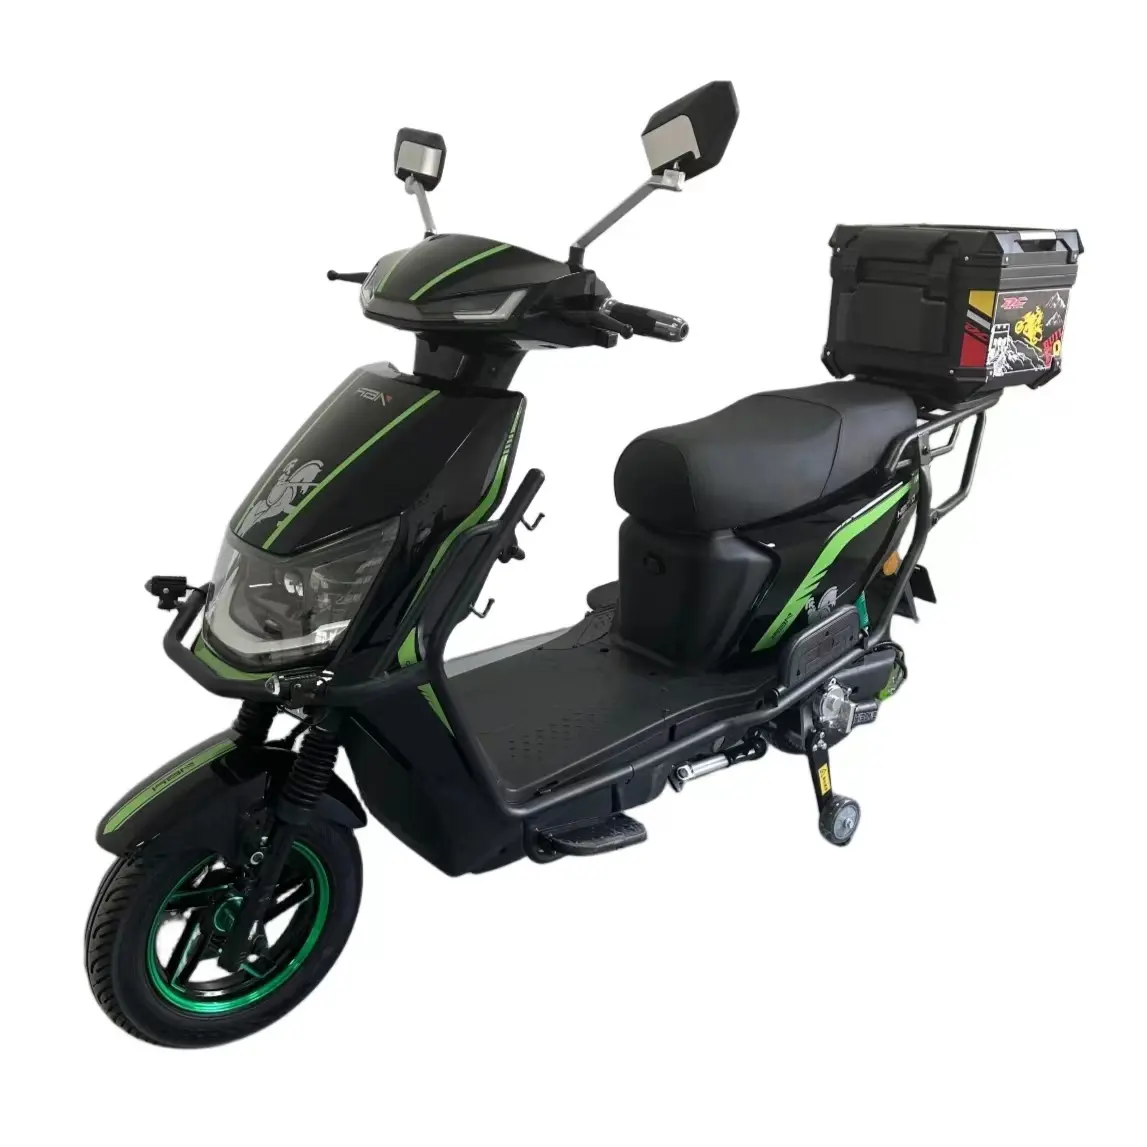 Moped Electric 2023 1500w E-scooter Cheap Price Good Performance Electric Scooter Street Legal Moped With Pedals